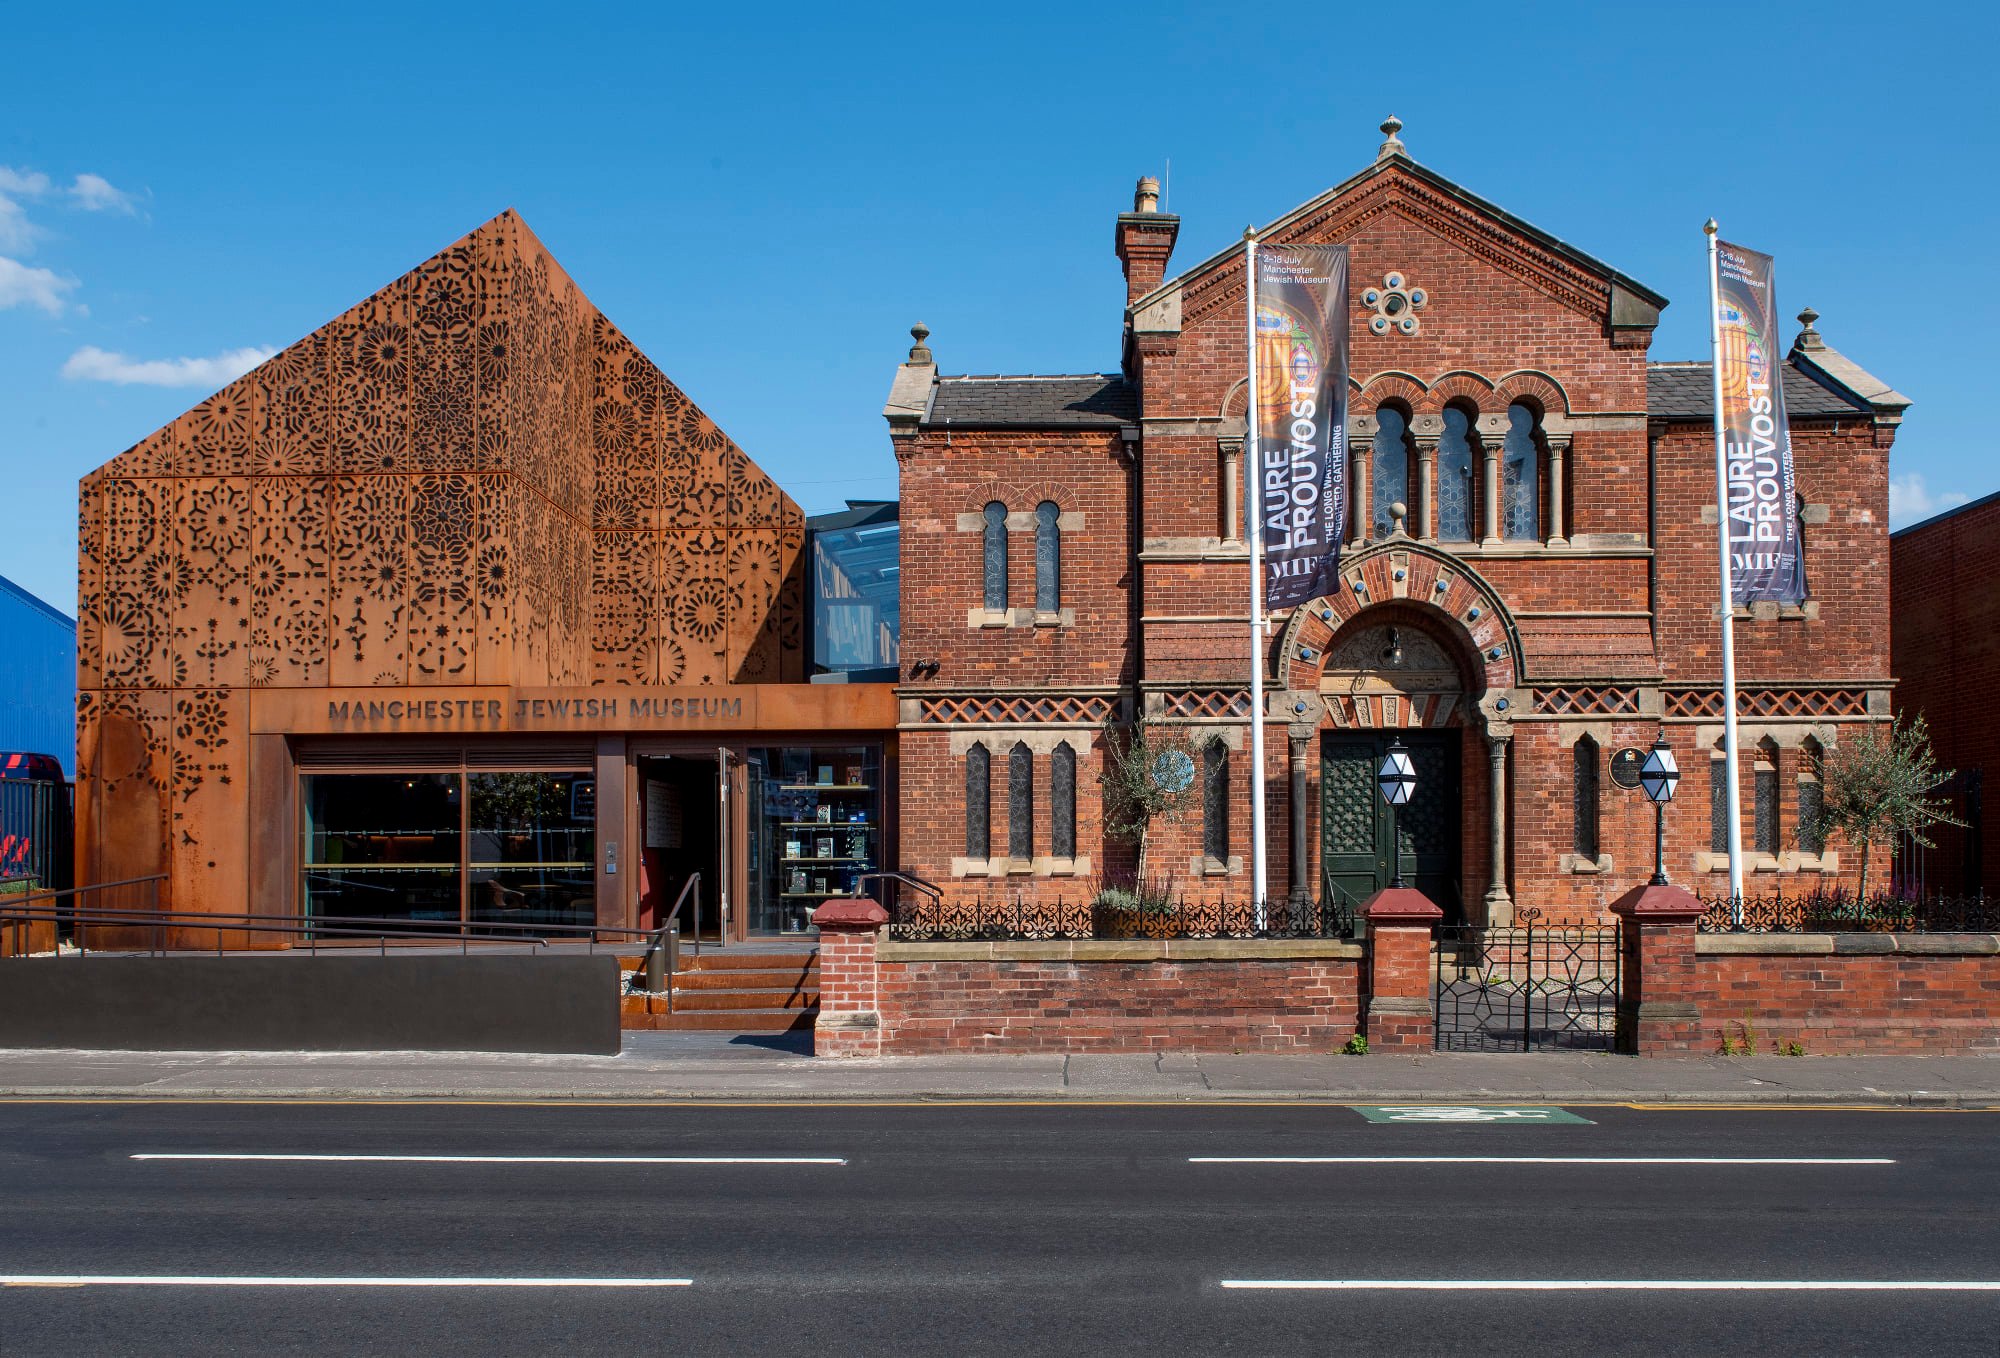 Exterior of Manchester Jewish Museum in Cheetham Hill